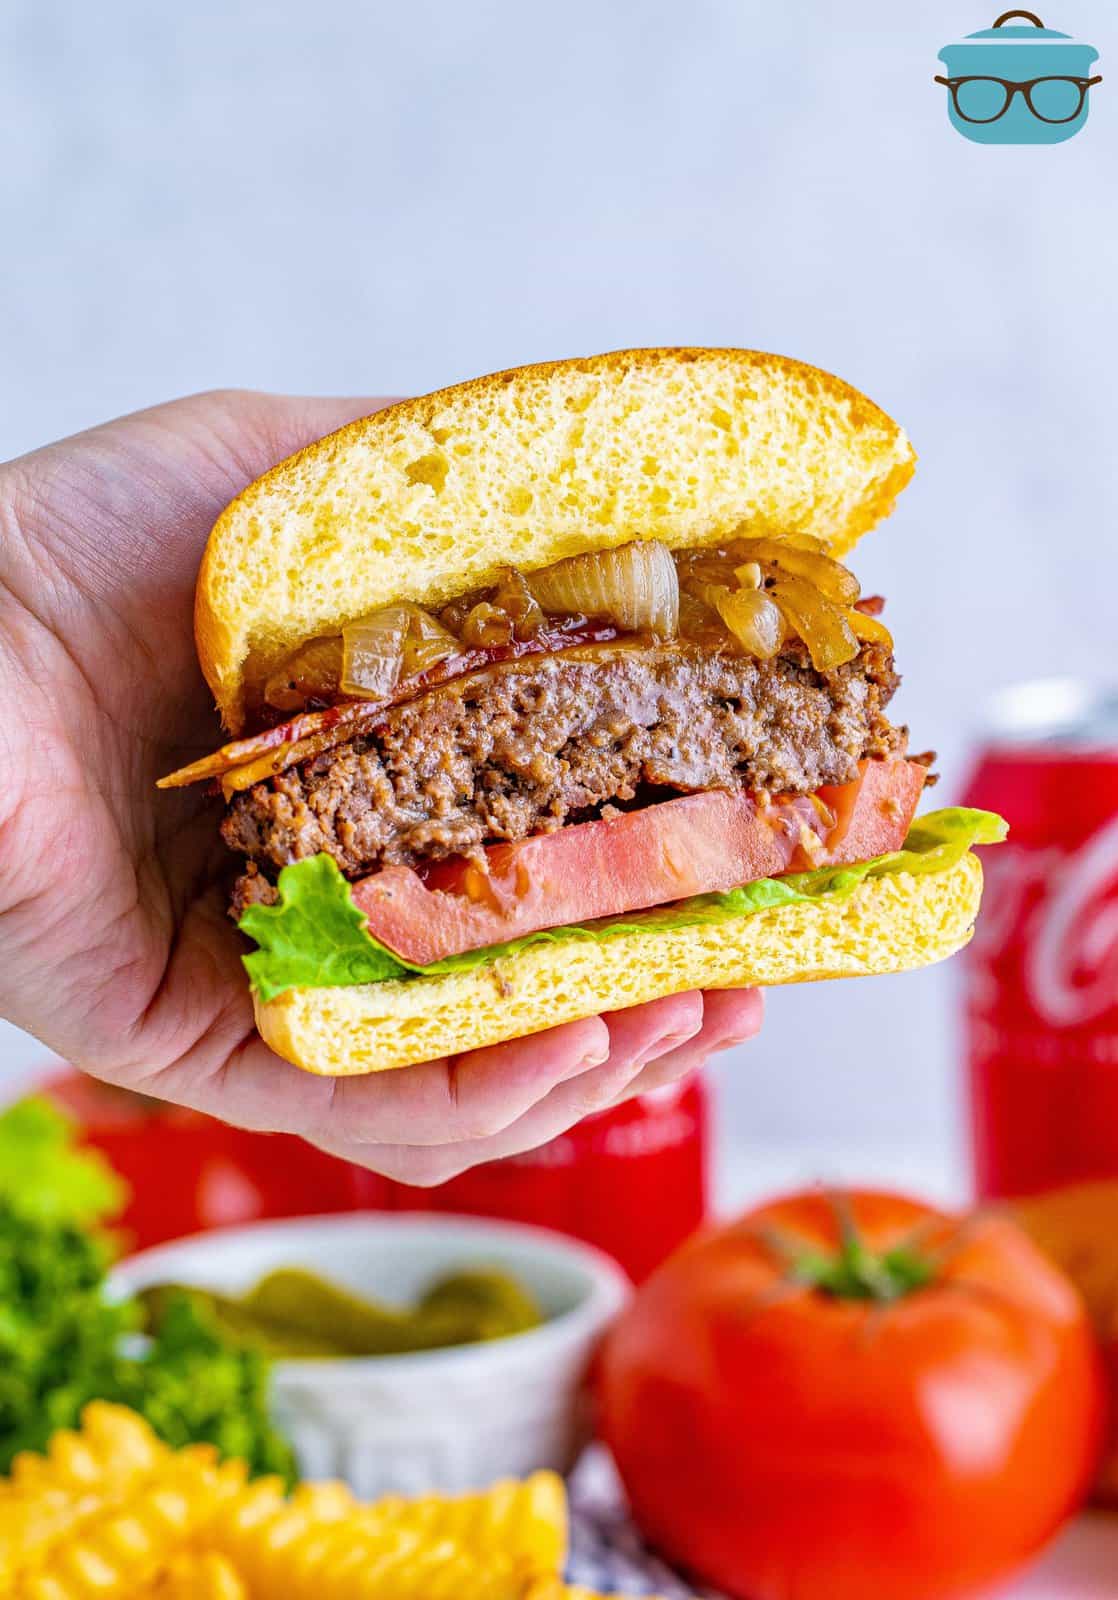 Hand holding up one of the Grilled Bacon Cheeseburgers with Coca Cola Onions sliced in half showing the inside.